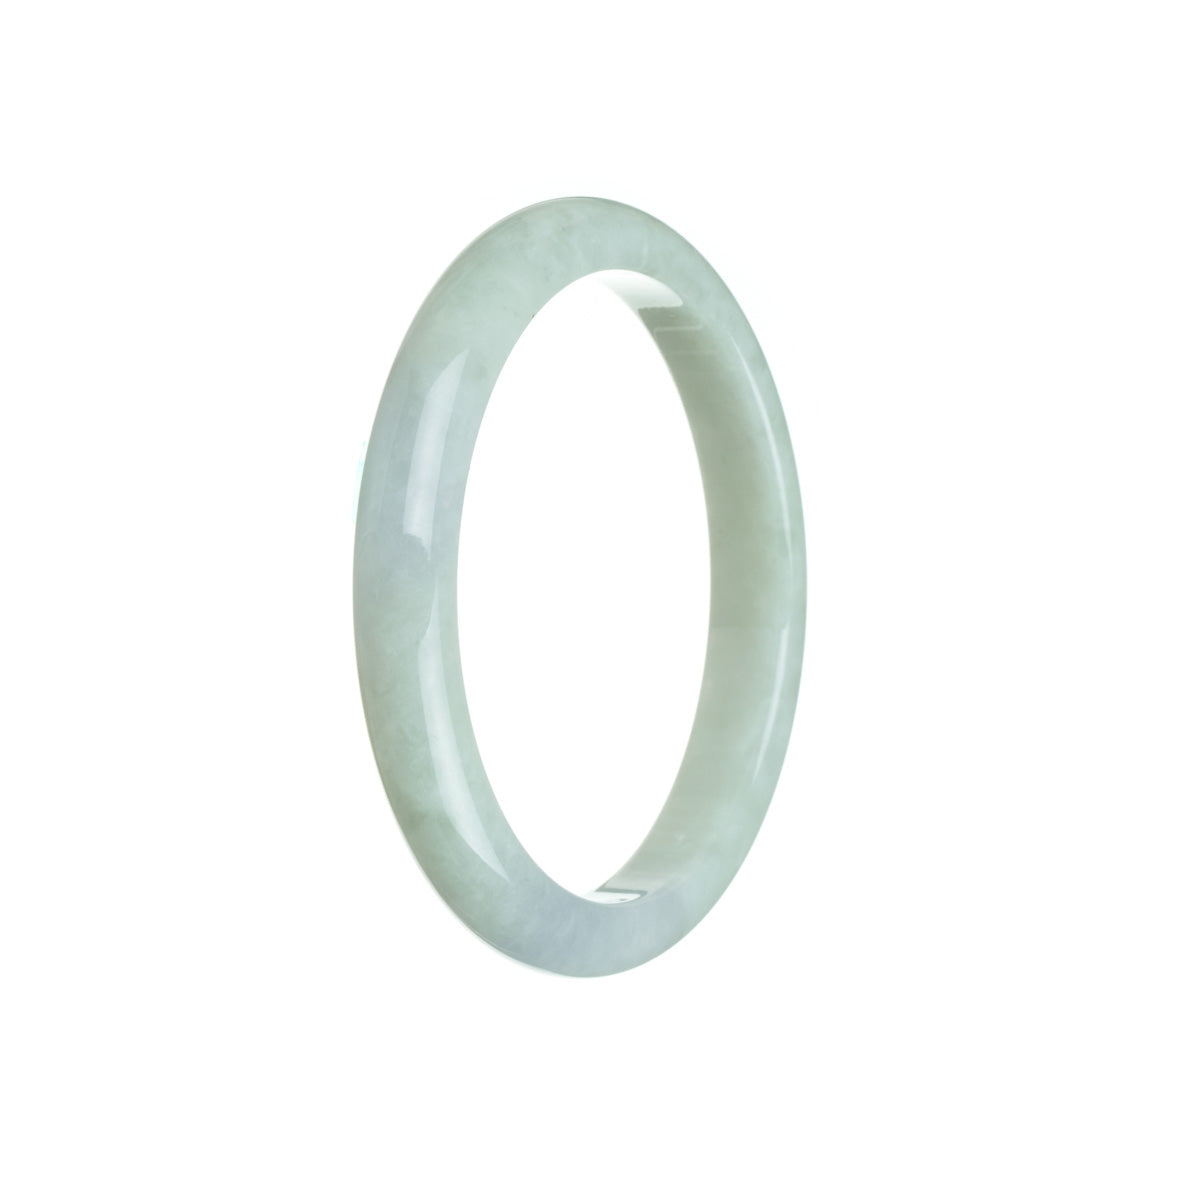 A close-up photo of a pale green traditional jade bangle with a semi-round shape, measuring 56mm. It is made of high-quality jade and has a smooth, polished surface. The jade bangle features a beautiful, natural color with subtle variations and intricate patterns. Perfect for those who appreciate the elegance of traditional jade jewelry.